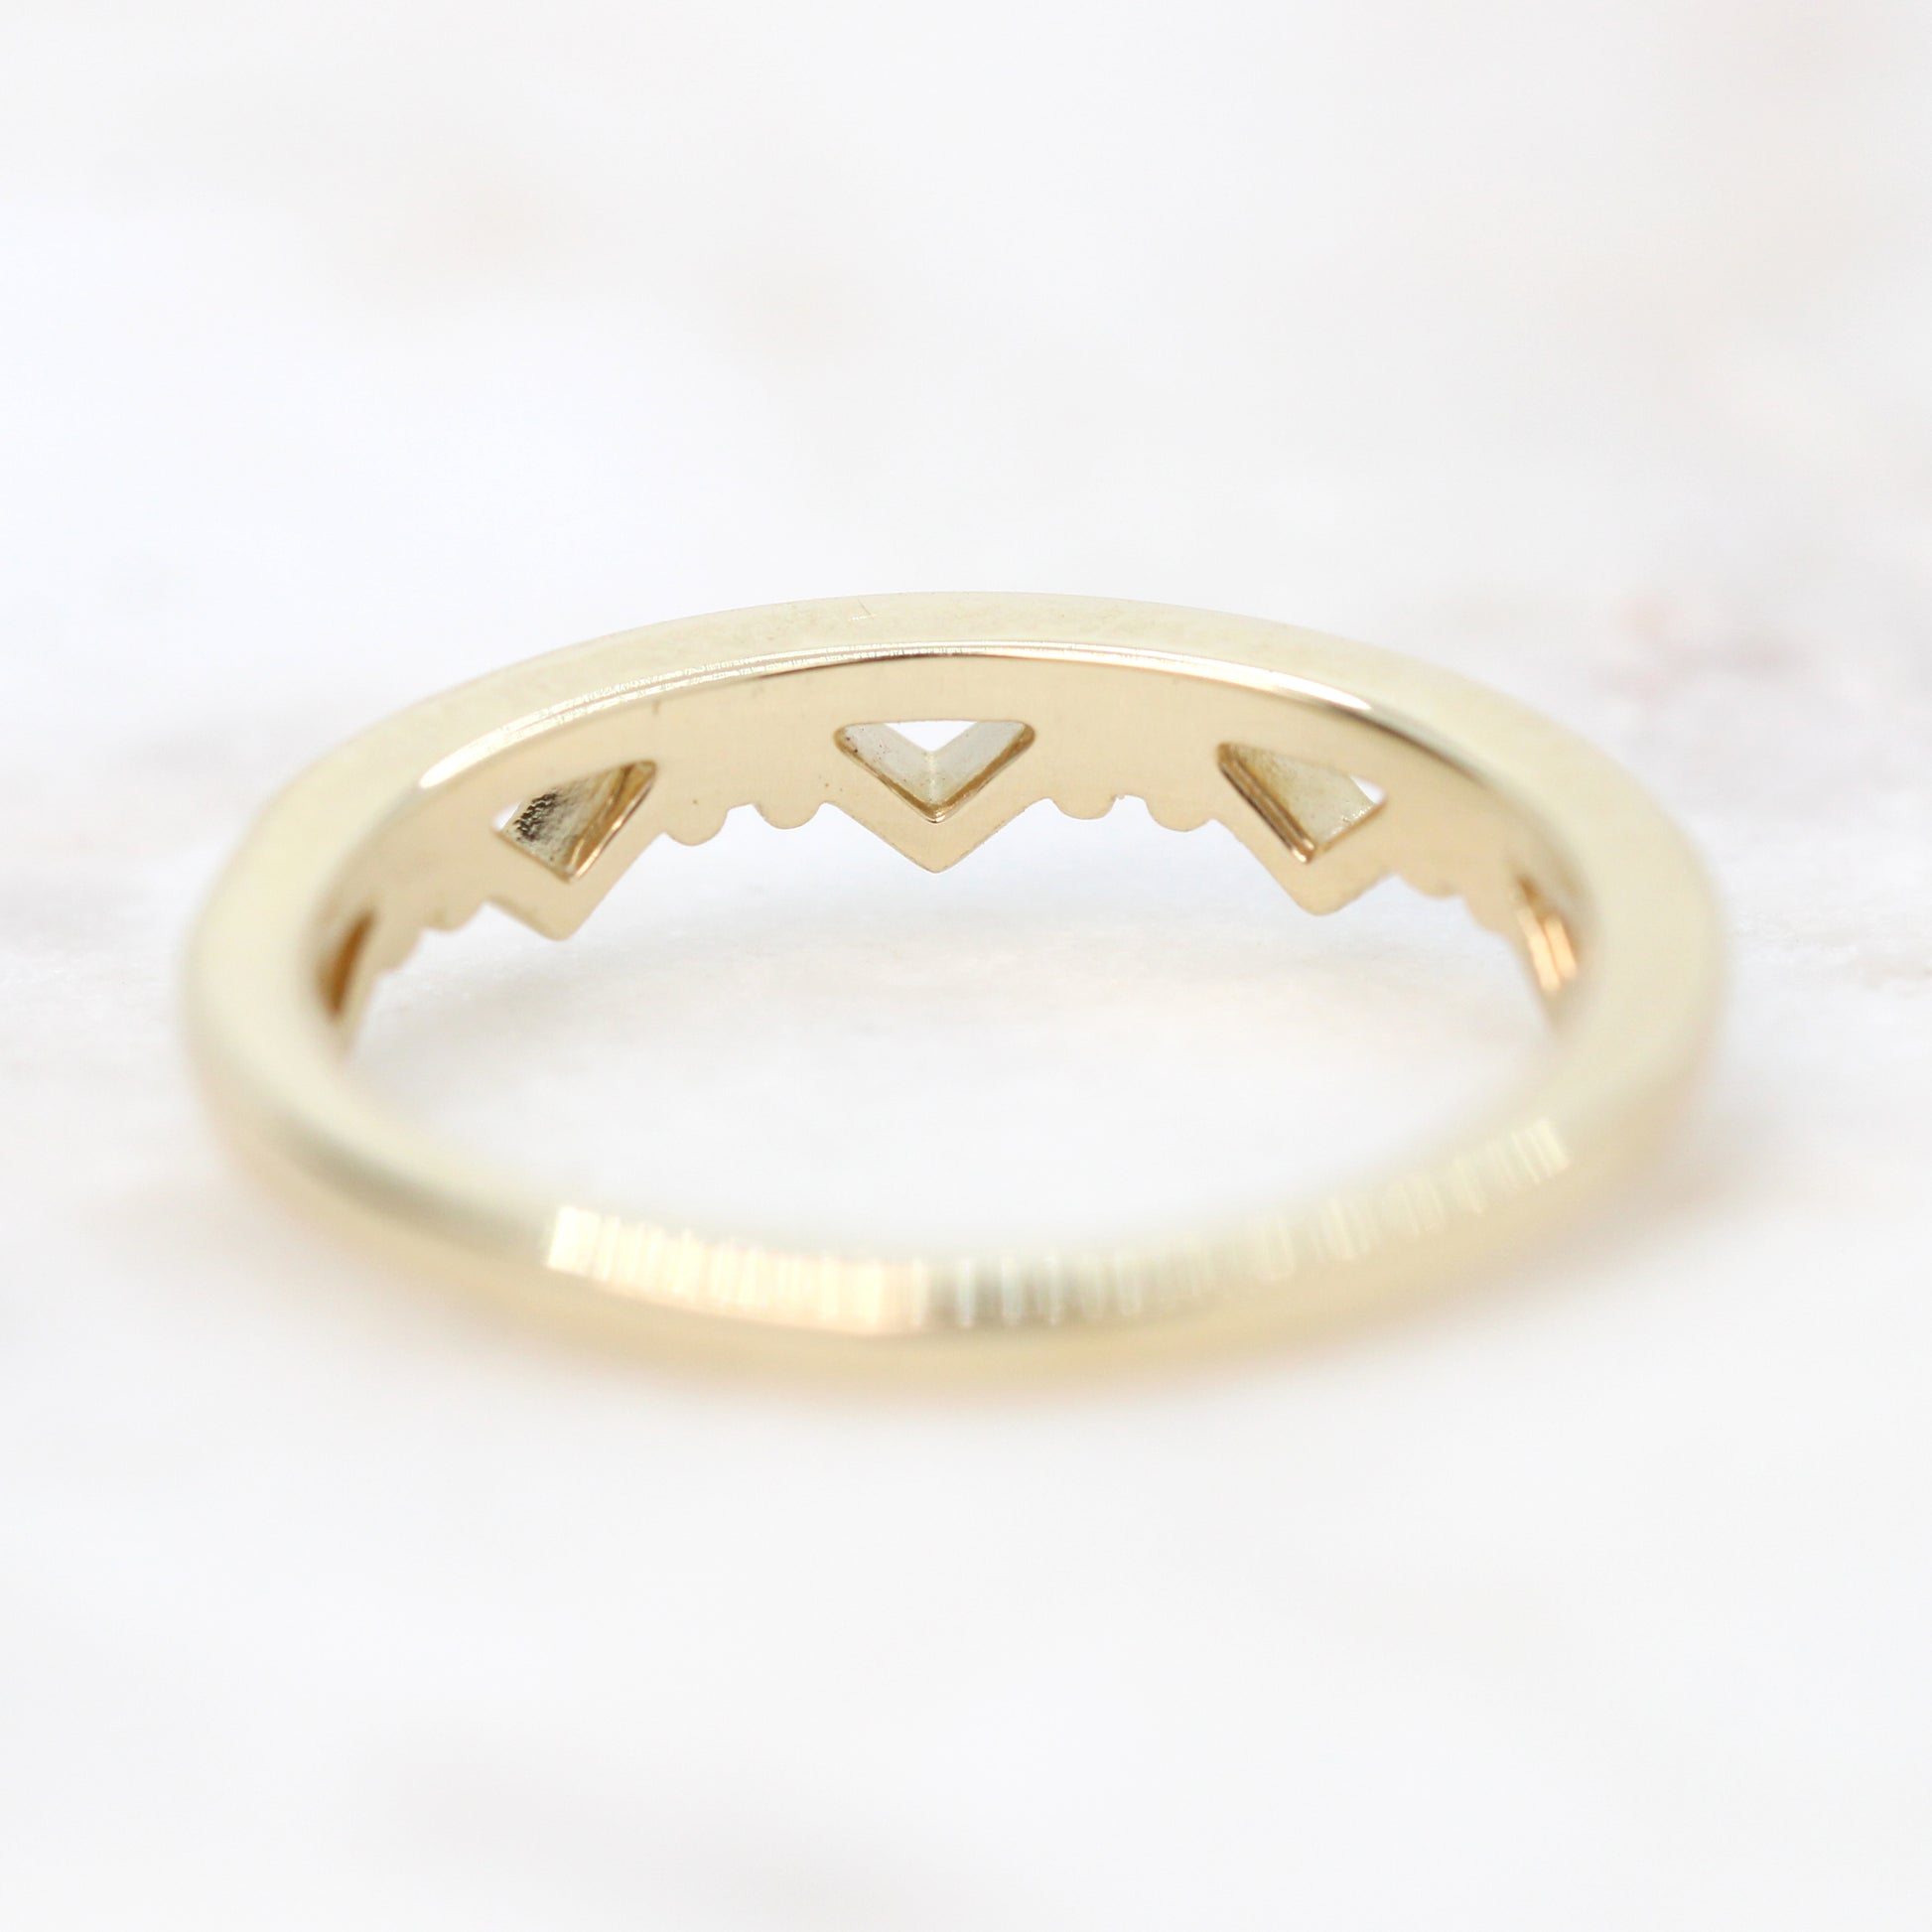 Samantha-  (M) Alpine Wedding Band - Stackable Wedding Band - Made to Order, Choose Your Gold Tone - Midwinter Co. Alternative Bridal Rings and Modern Fine Jewelry